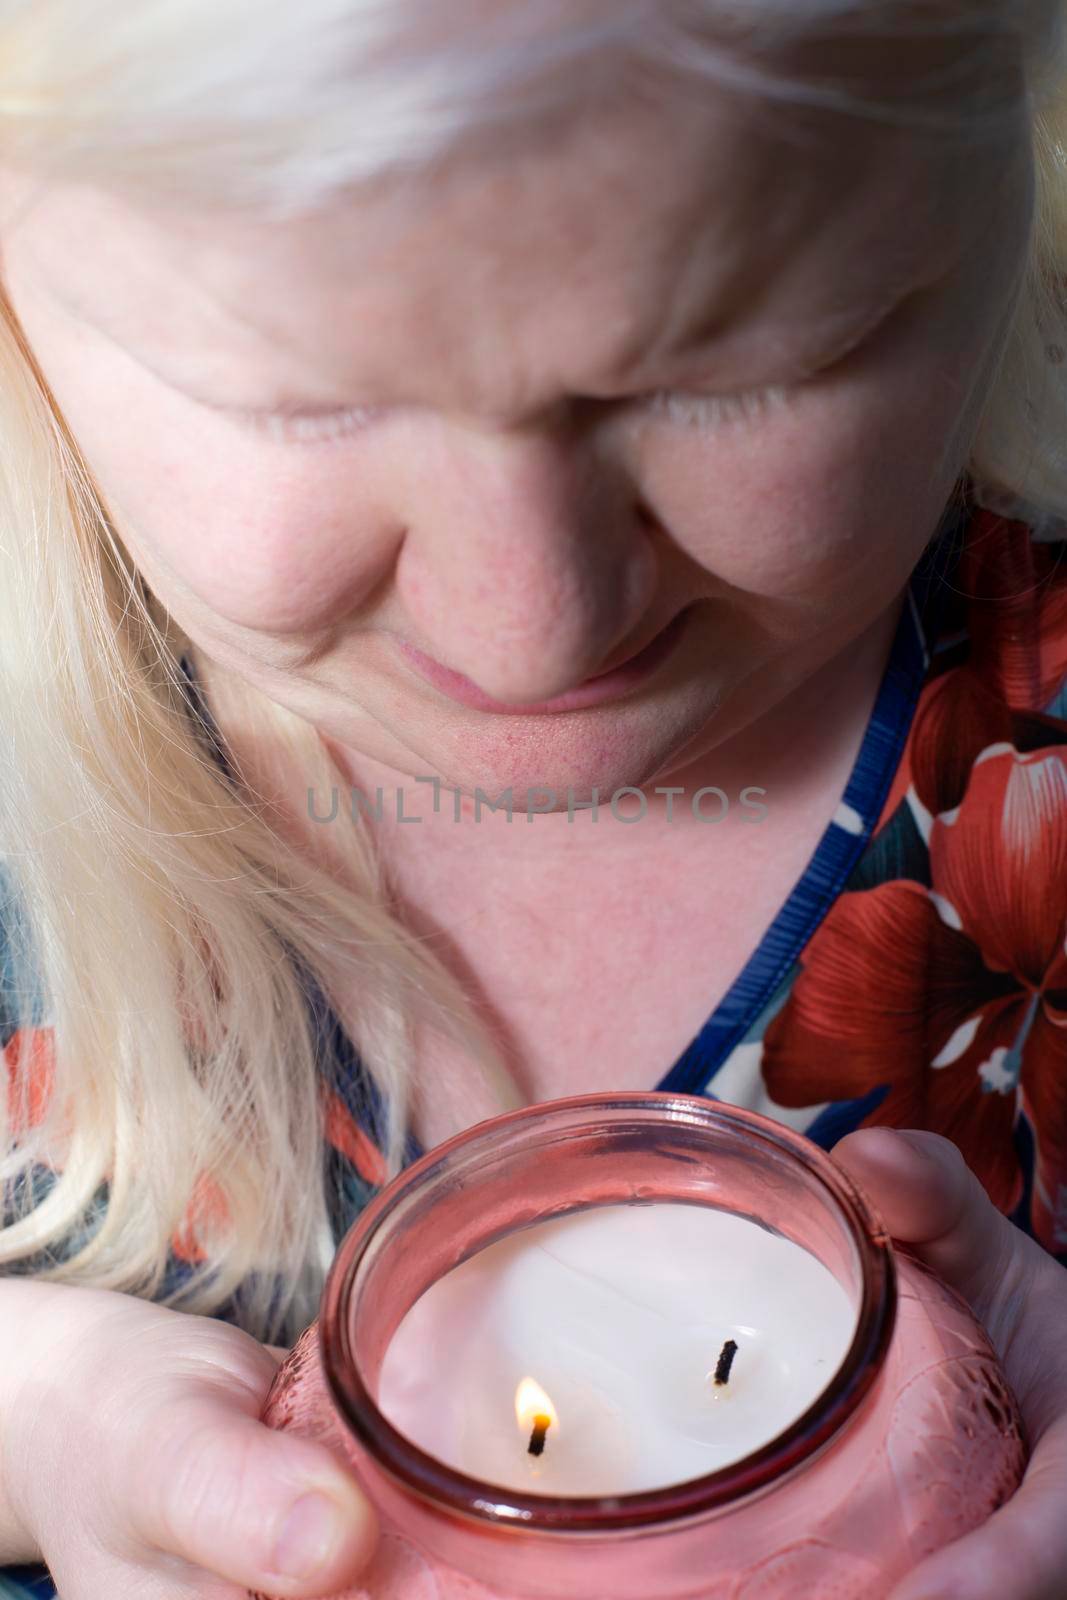 Albino Woman Sniffing a Lit Candle by tornado98